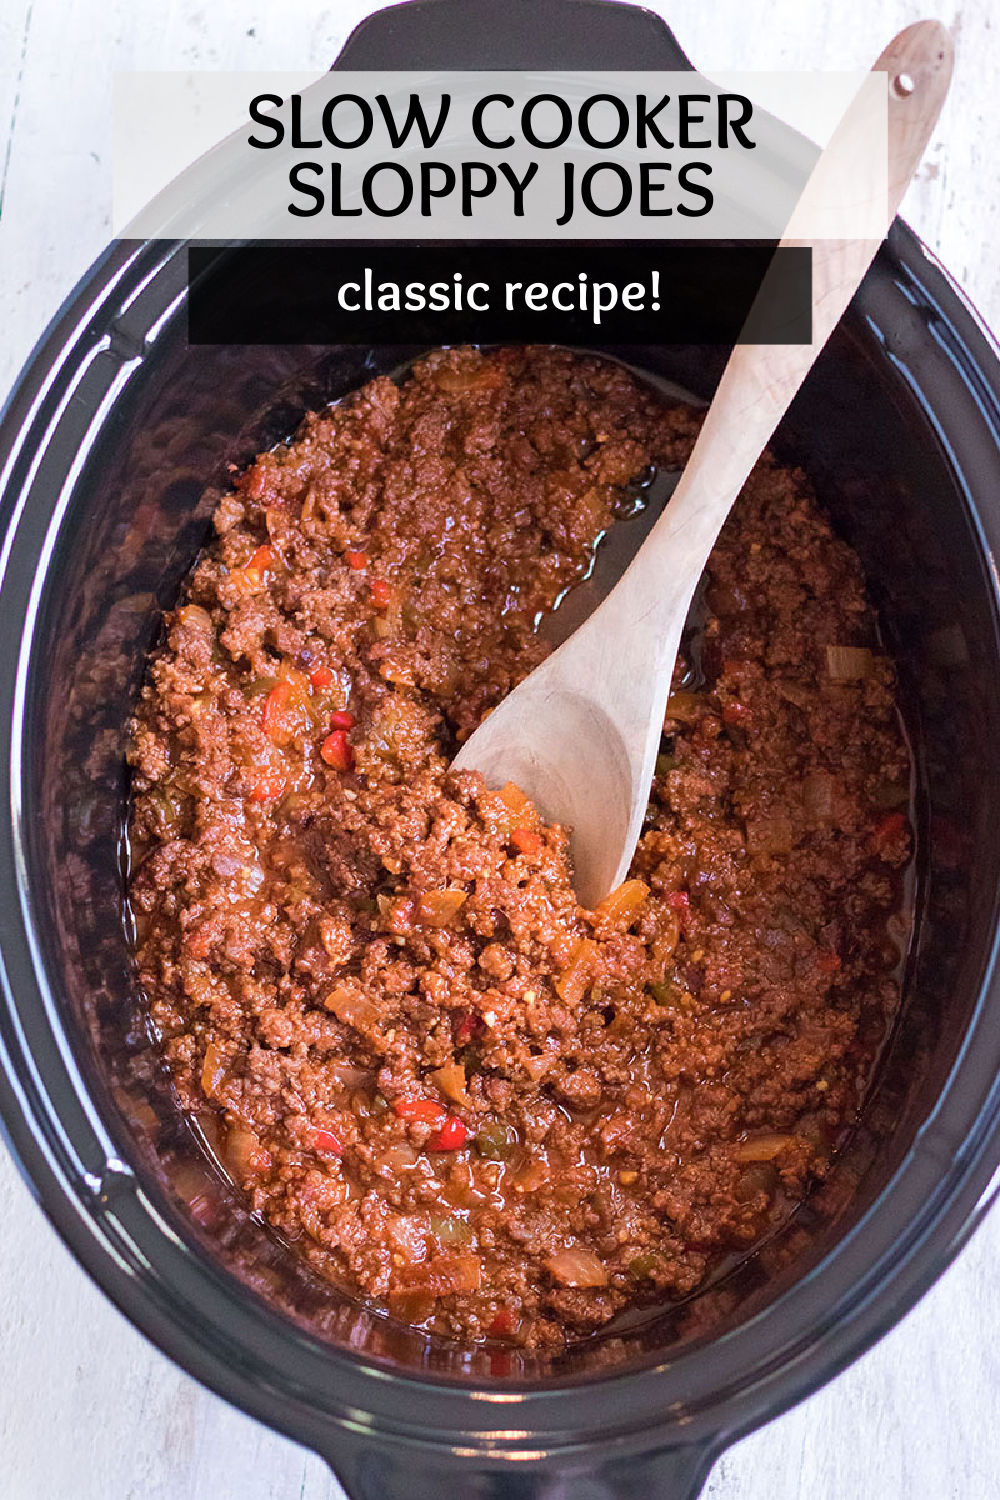 This old fashioned sloppy joes recipe is made extra easy in the slow cooker! The meat mixture slow cooks for hours and then is ready to pile onto a bun. This easy recipe is perfect for the whole family and makes enough for a crowd. | www.persnicketyplates.com